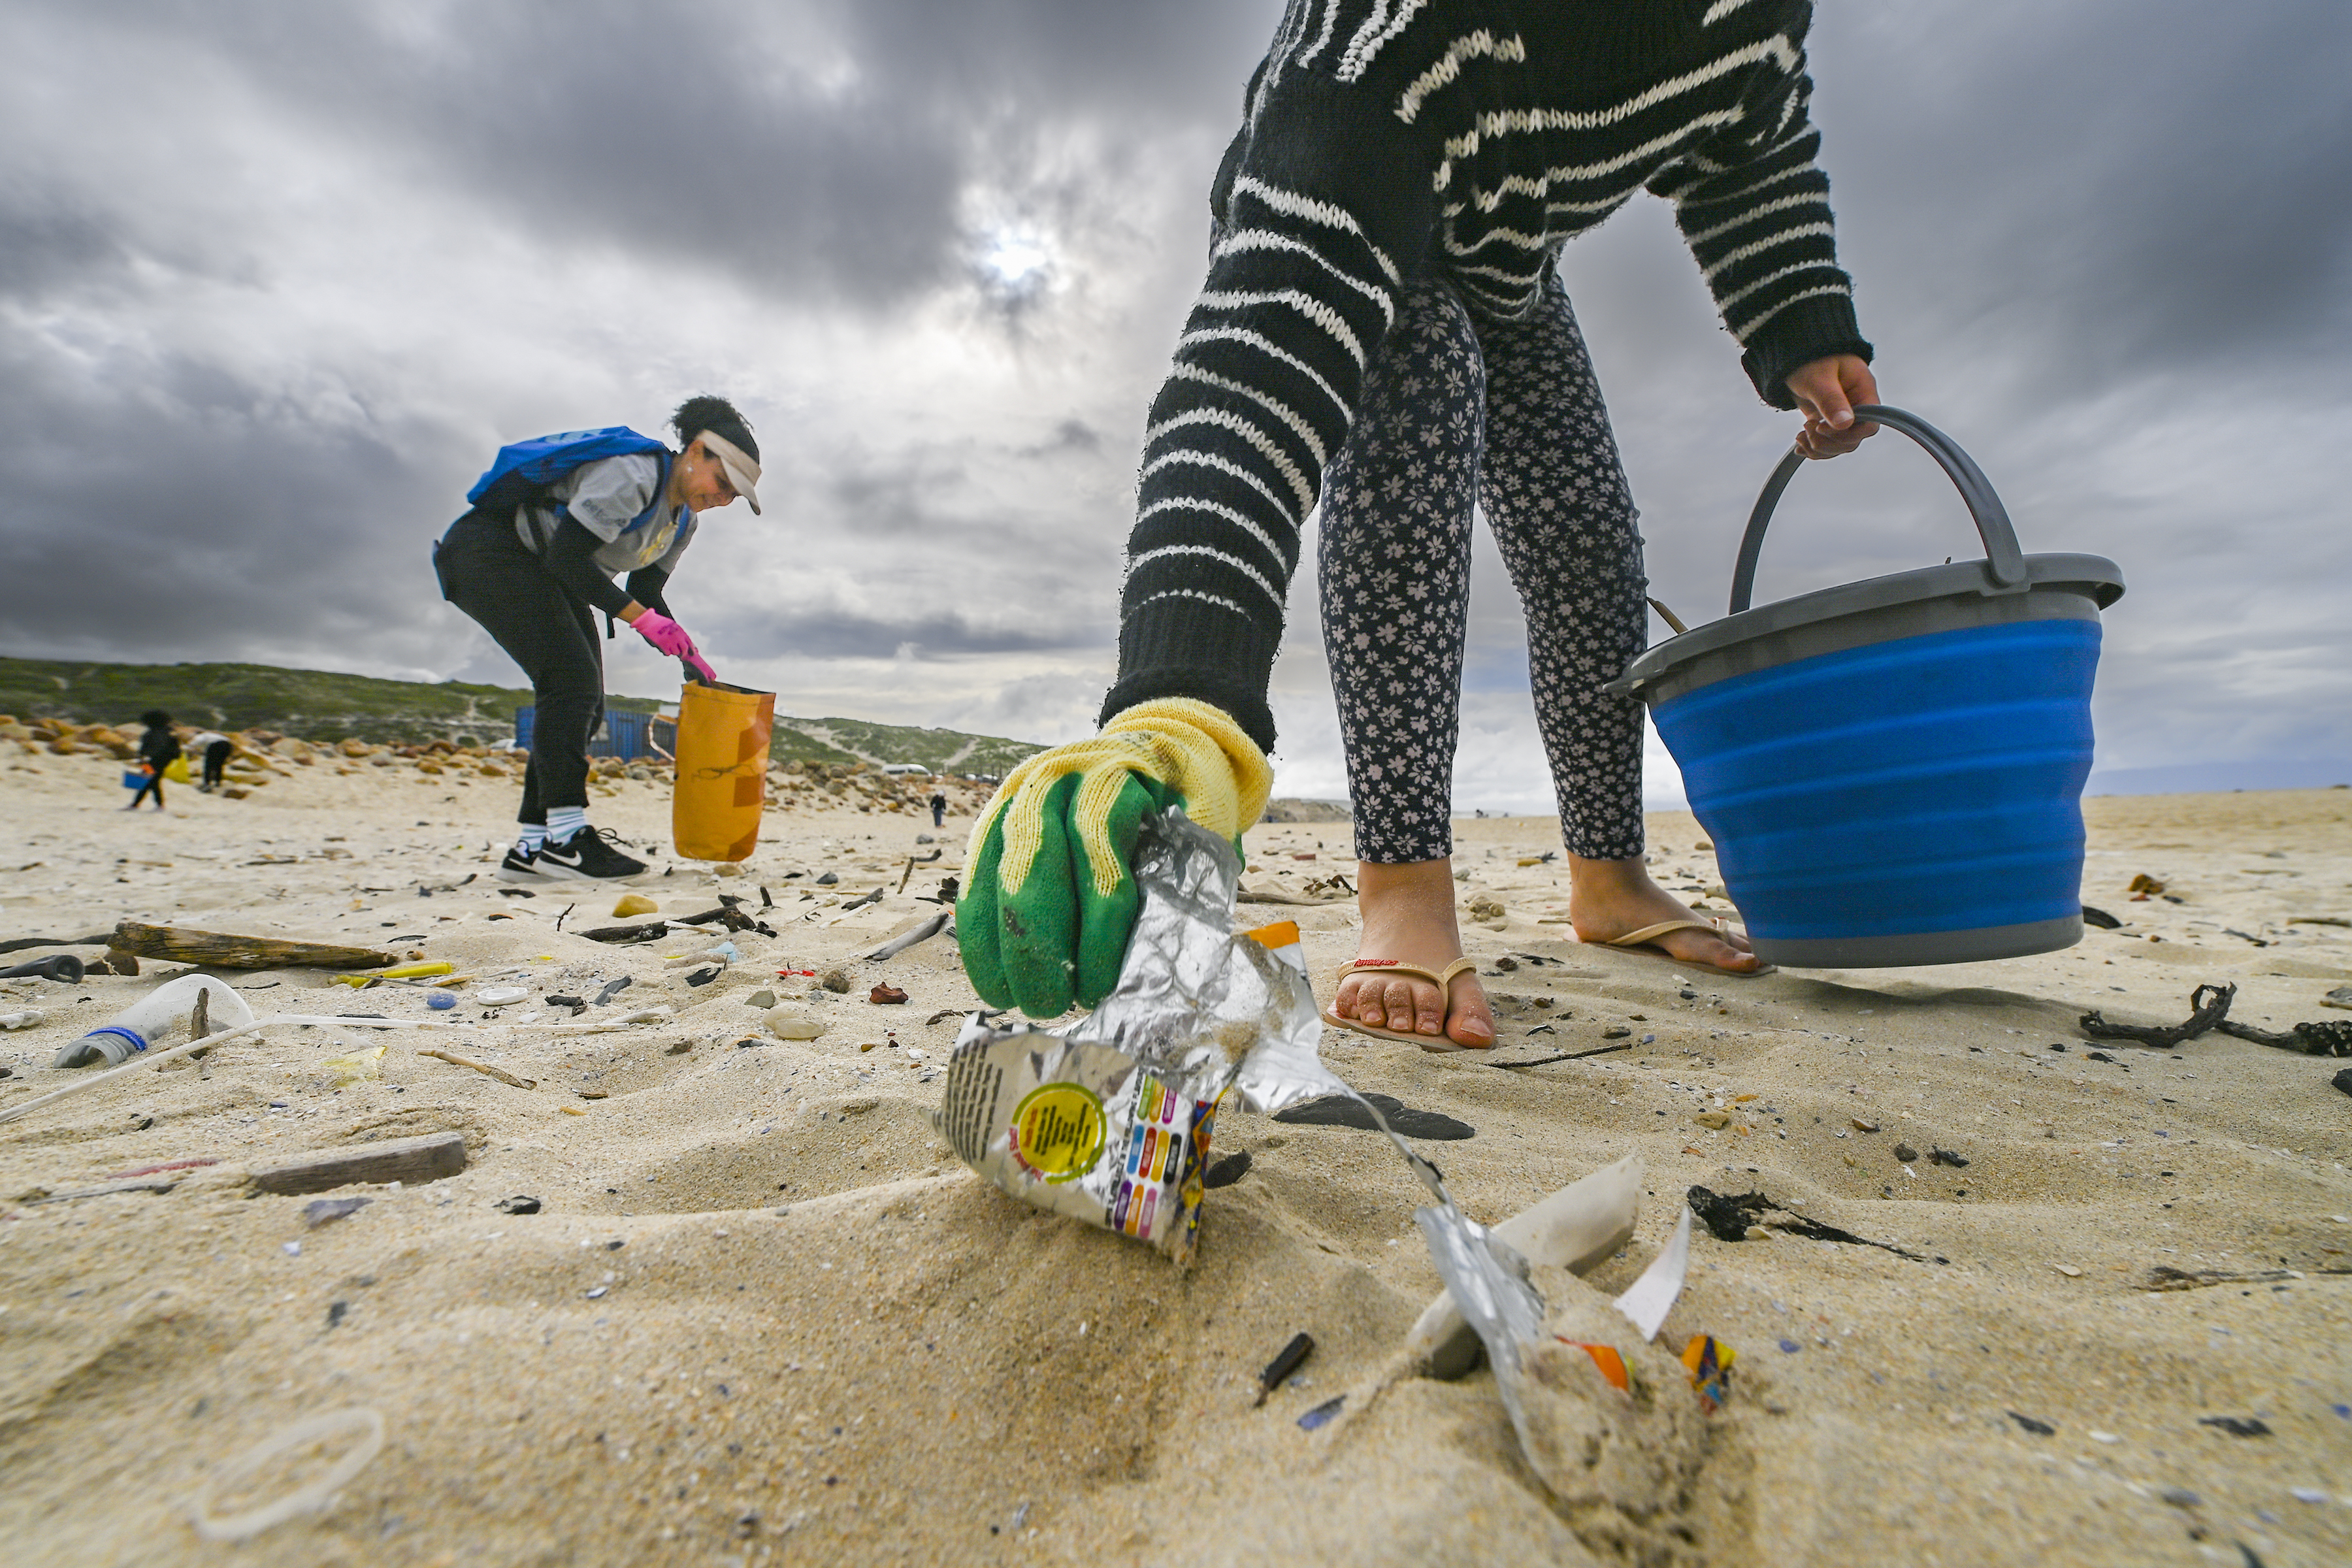 CAPE TOWN, SOUTH AFRICA  SEPTEMBER 17: Volunteers in collaboration with the Two Oceans Aquarium take part in a clean up campaign at Monwabisi Beach as part of the International Coast Cleaning Day on September 17, 2022 in Cape Town, South Africa. Volunteers removed plastics and other rubbish and made notes on the different types of pollution on the beach. (Photo by Gallo Images/Die Burger/Jaco Marais)